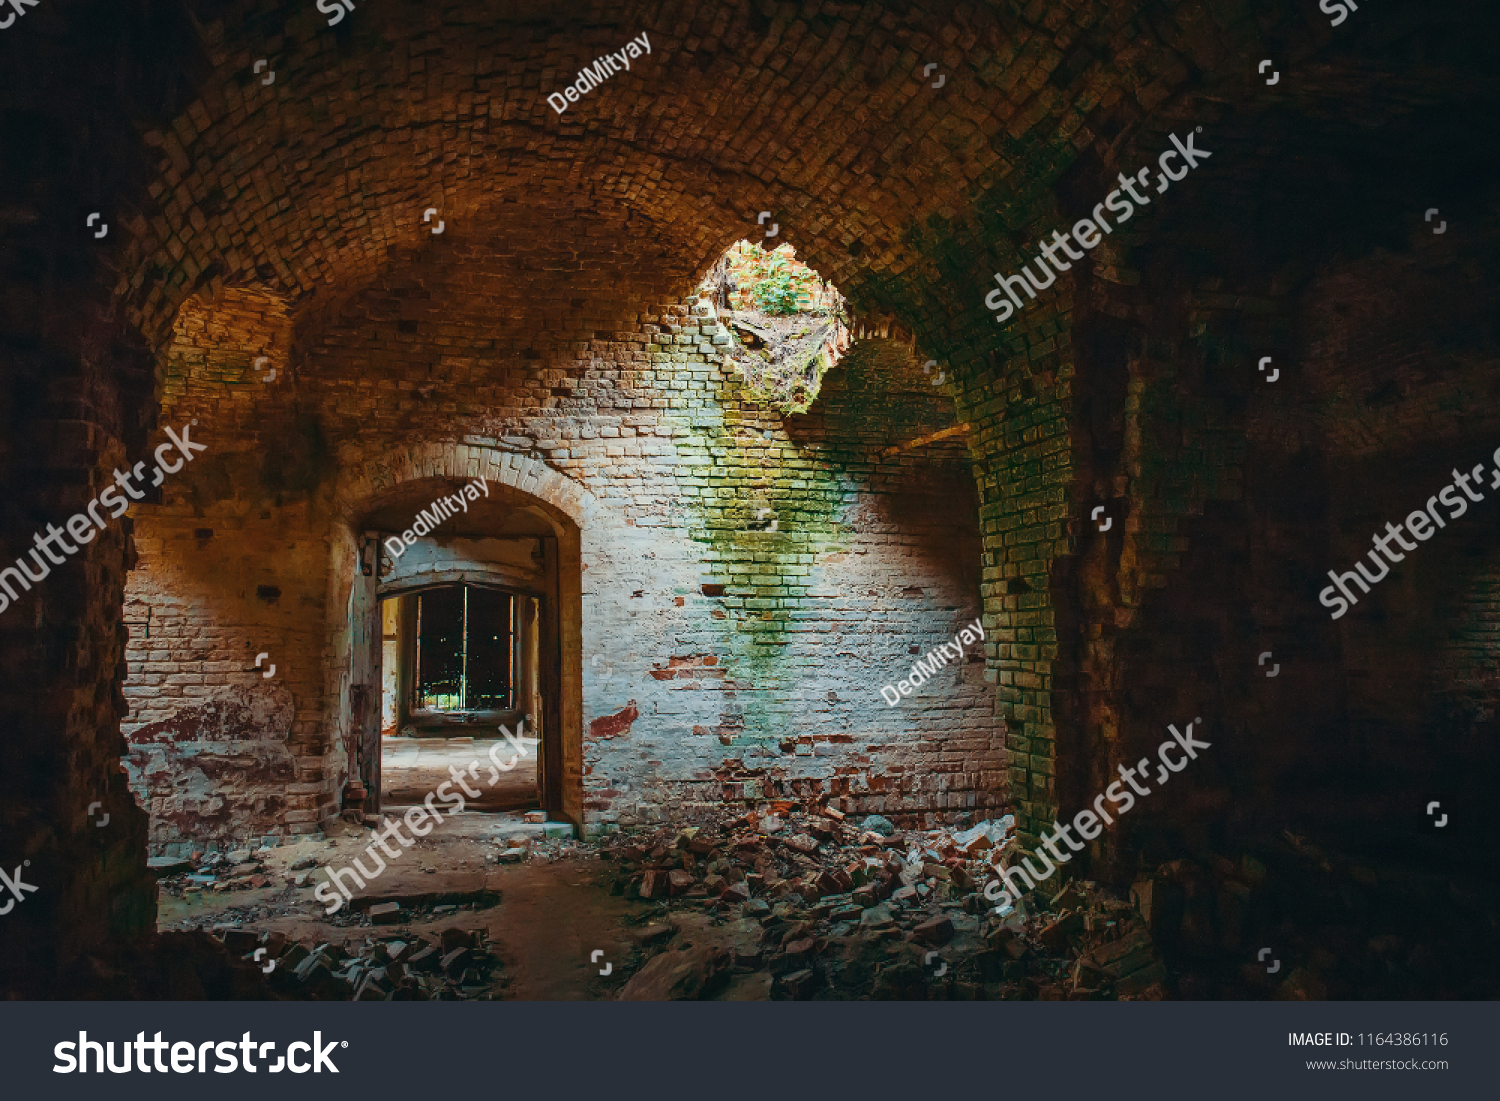 Ruined ancient brick temple inside interior with doors, corridors and arch, vintage toned  #1164386116